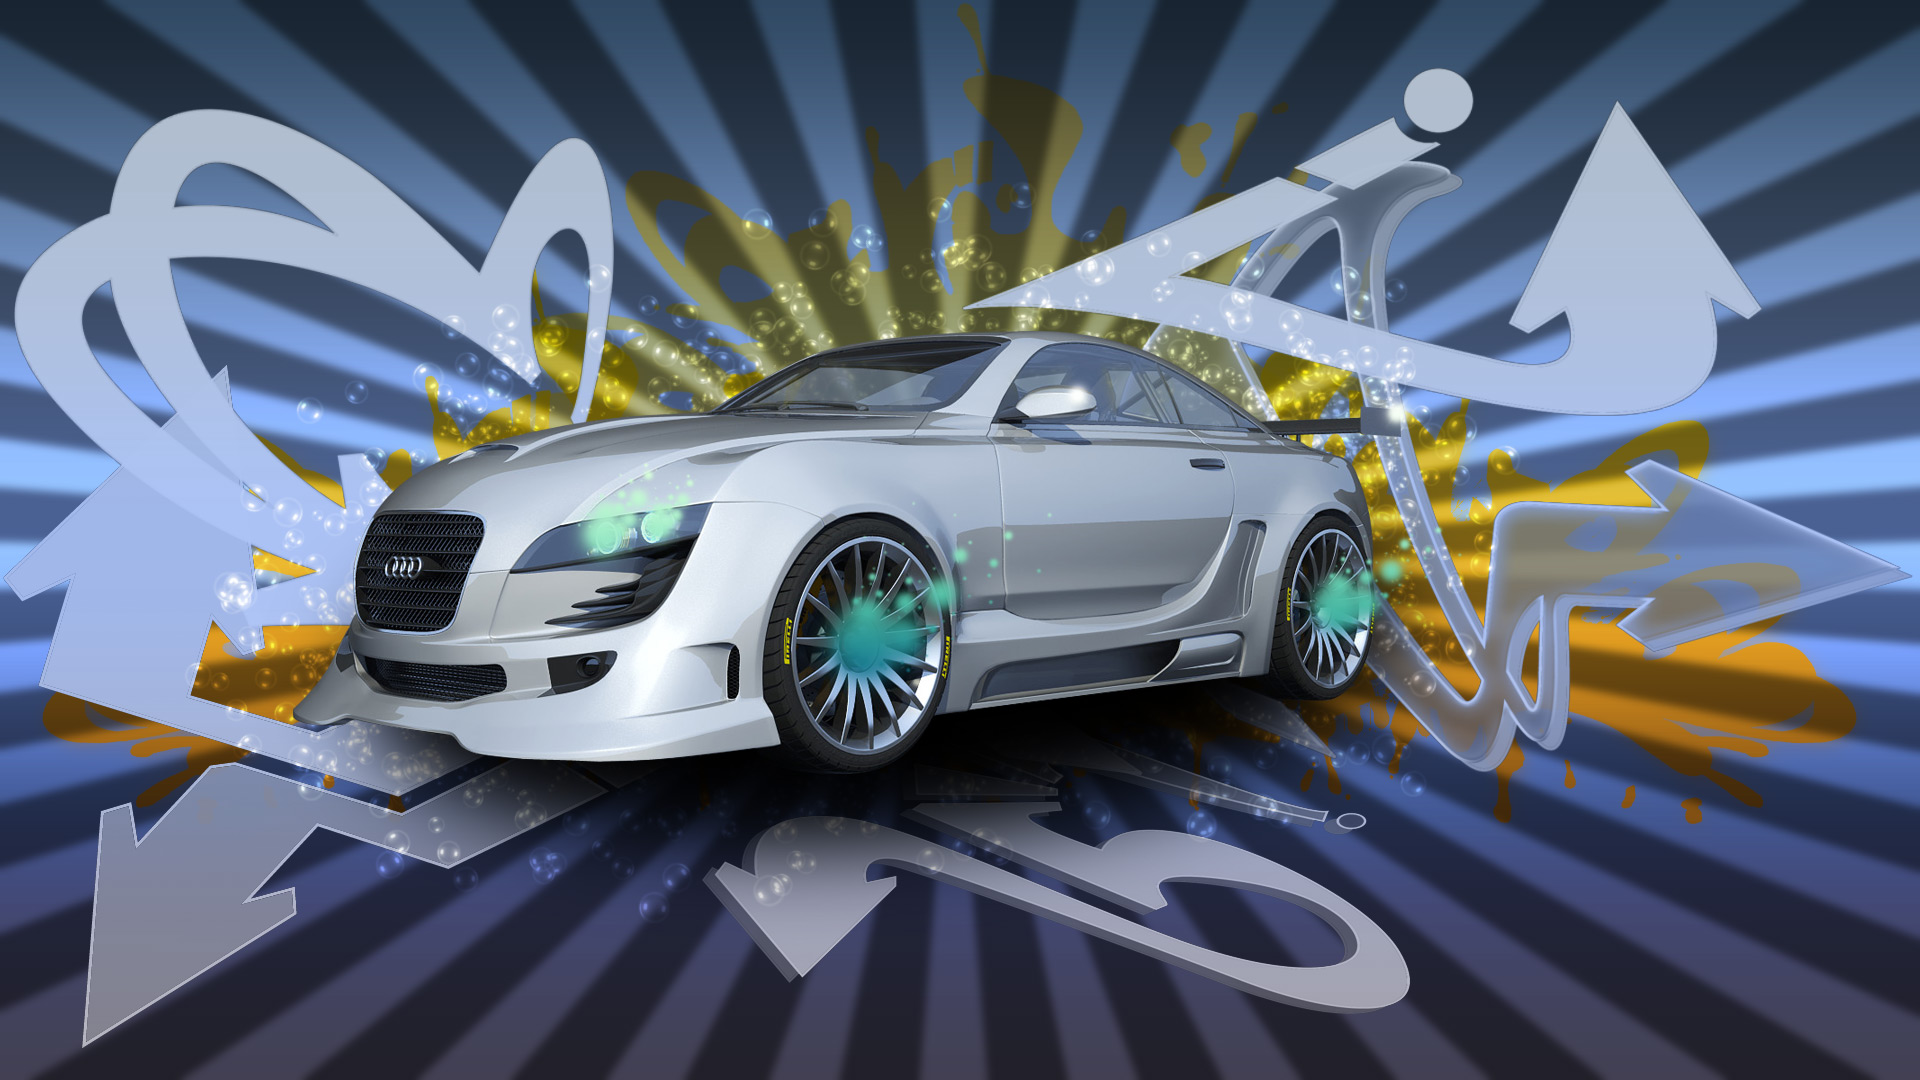 We Are Going To Create A Graffiti Wallpaper For Hot Looking Car